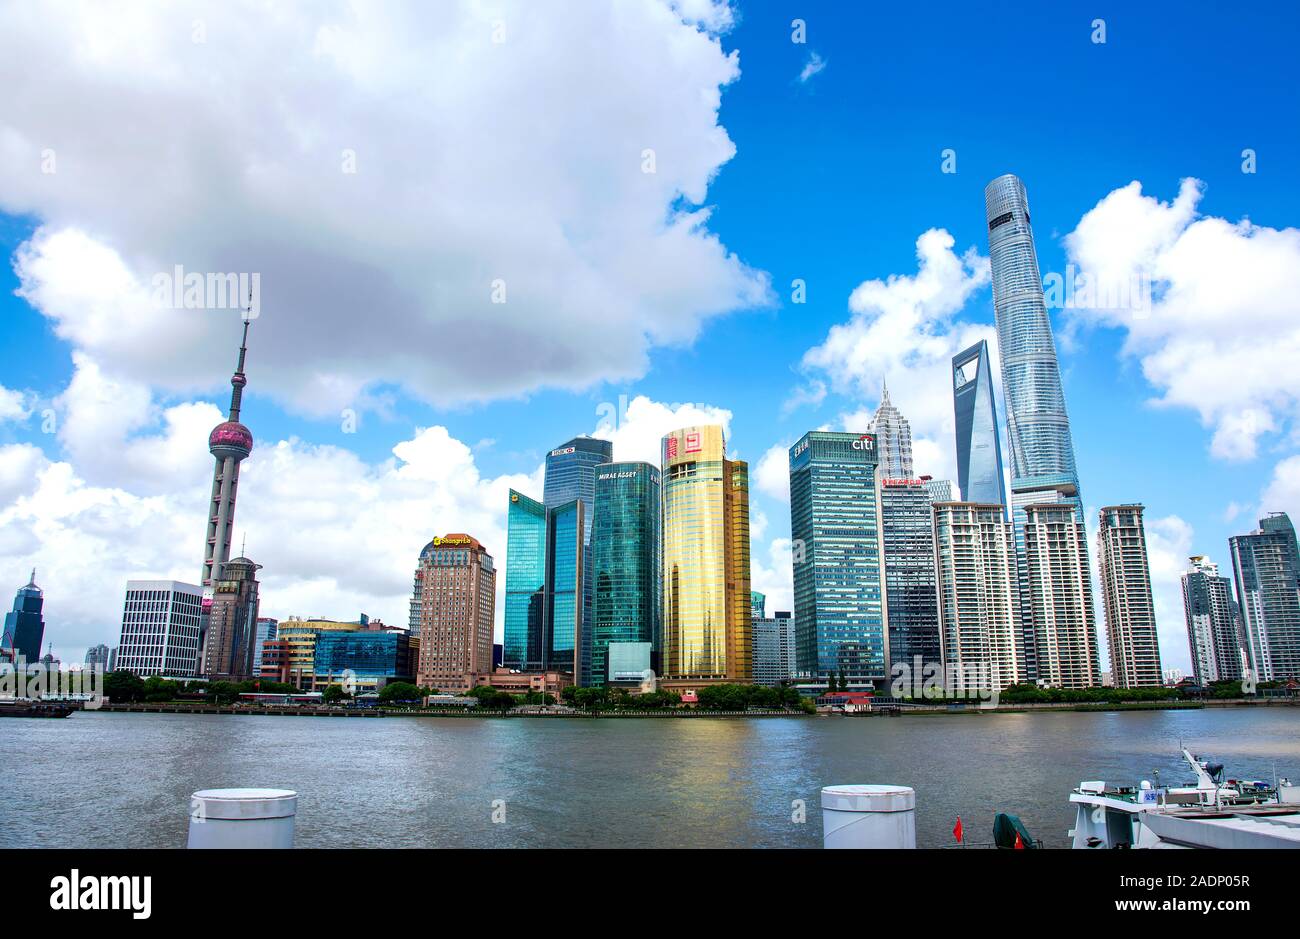 Shanghai, China - August 8, 2019: Shanghai modern downtown area with skyscrapers in Chinese metropolis view from the Bund Stock Photo